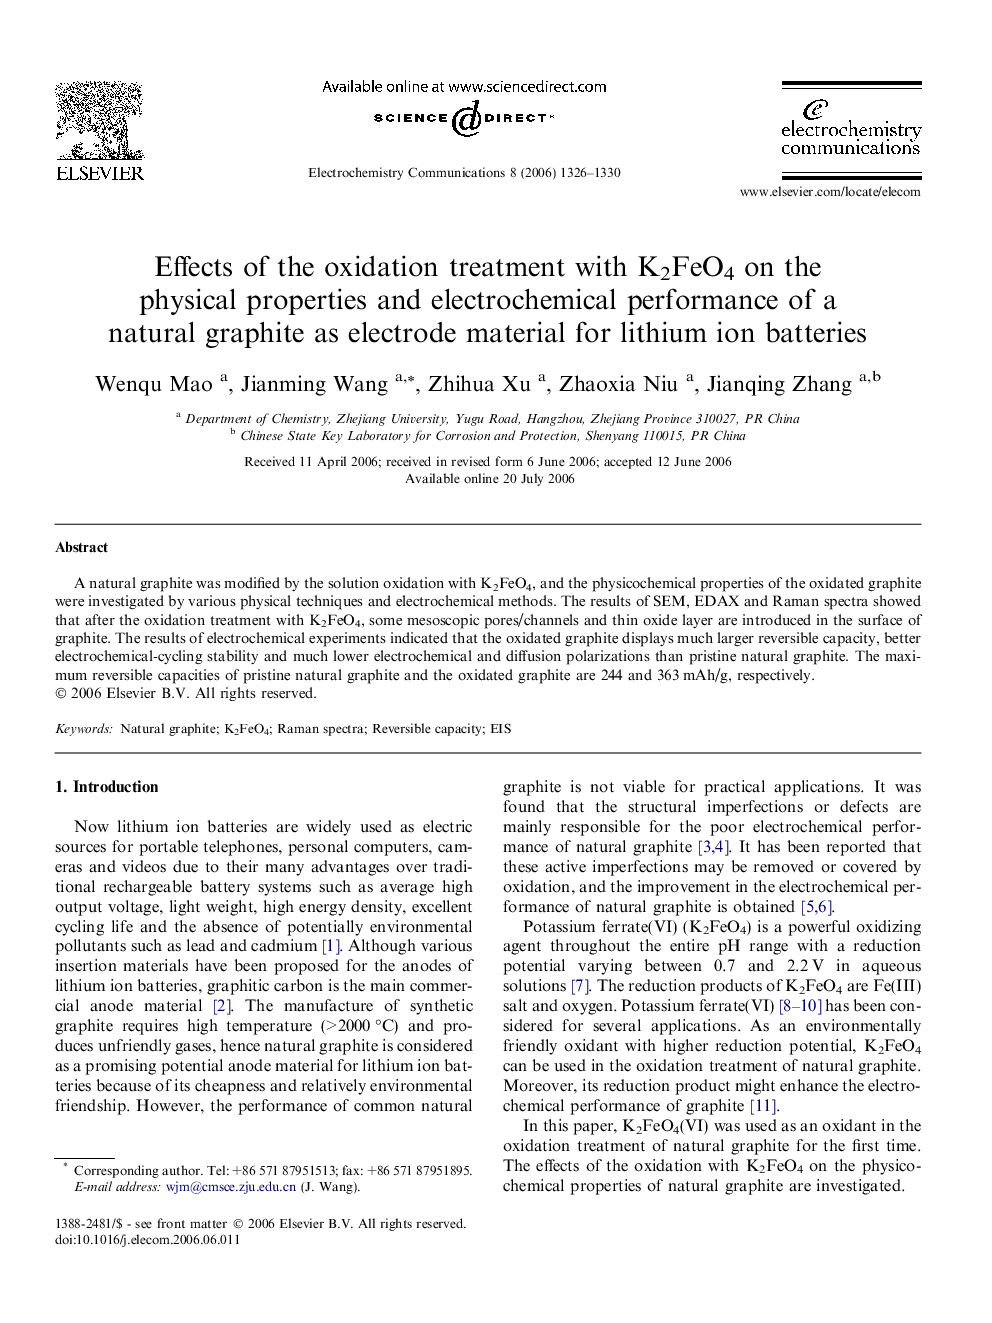 Effects of the oxidation treatment with K2FeO4 on the physical properties and electrochemical performance of a natural graphite as electrode material for lithium ion batteries